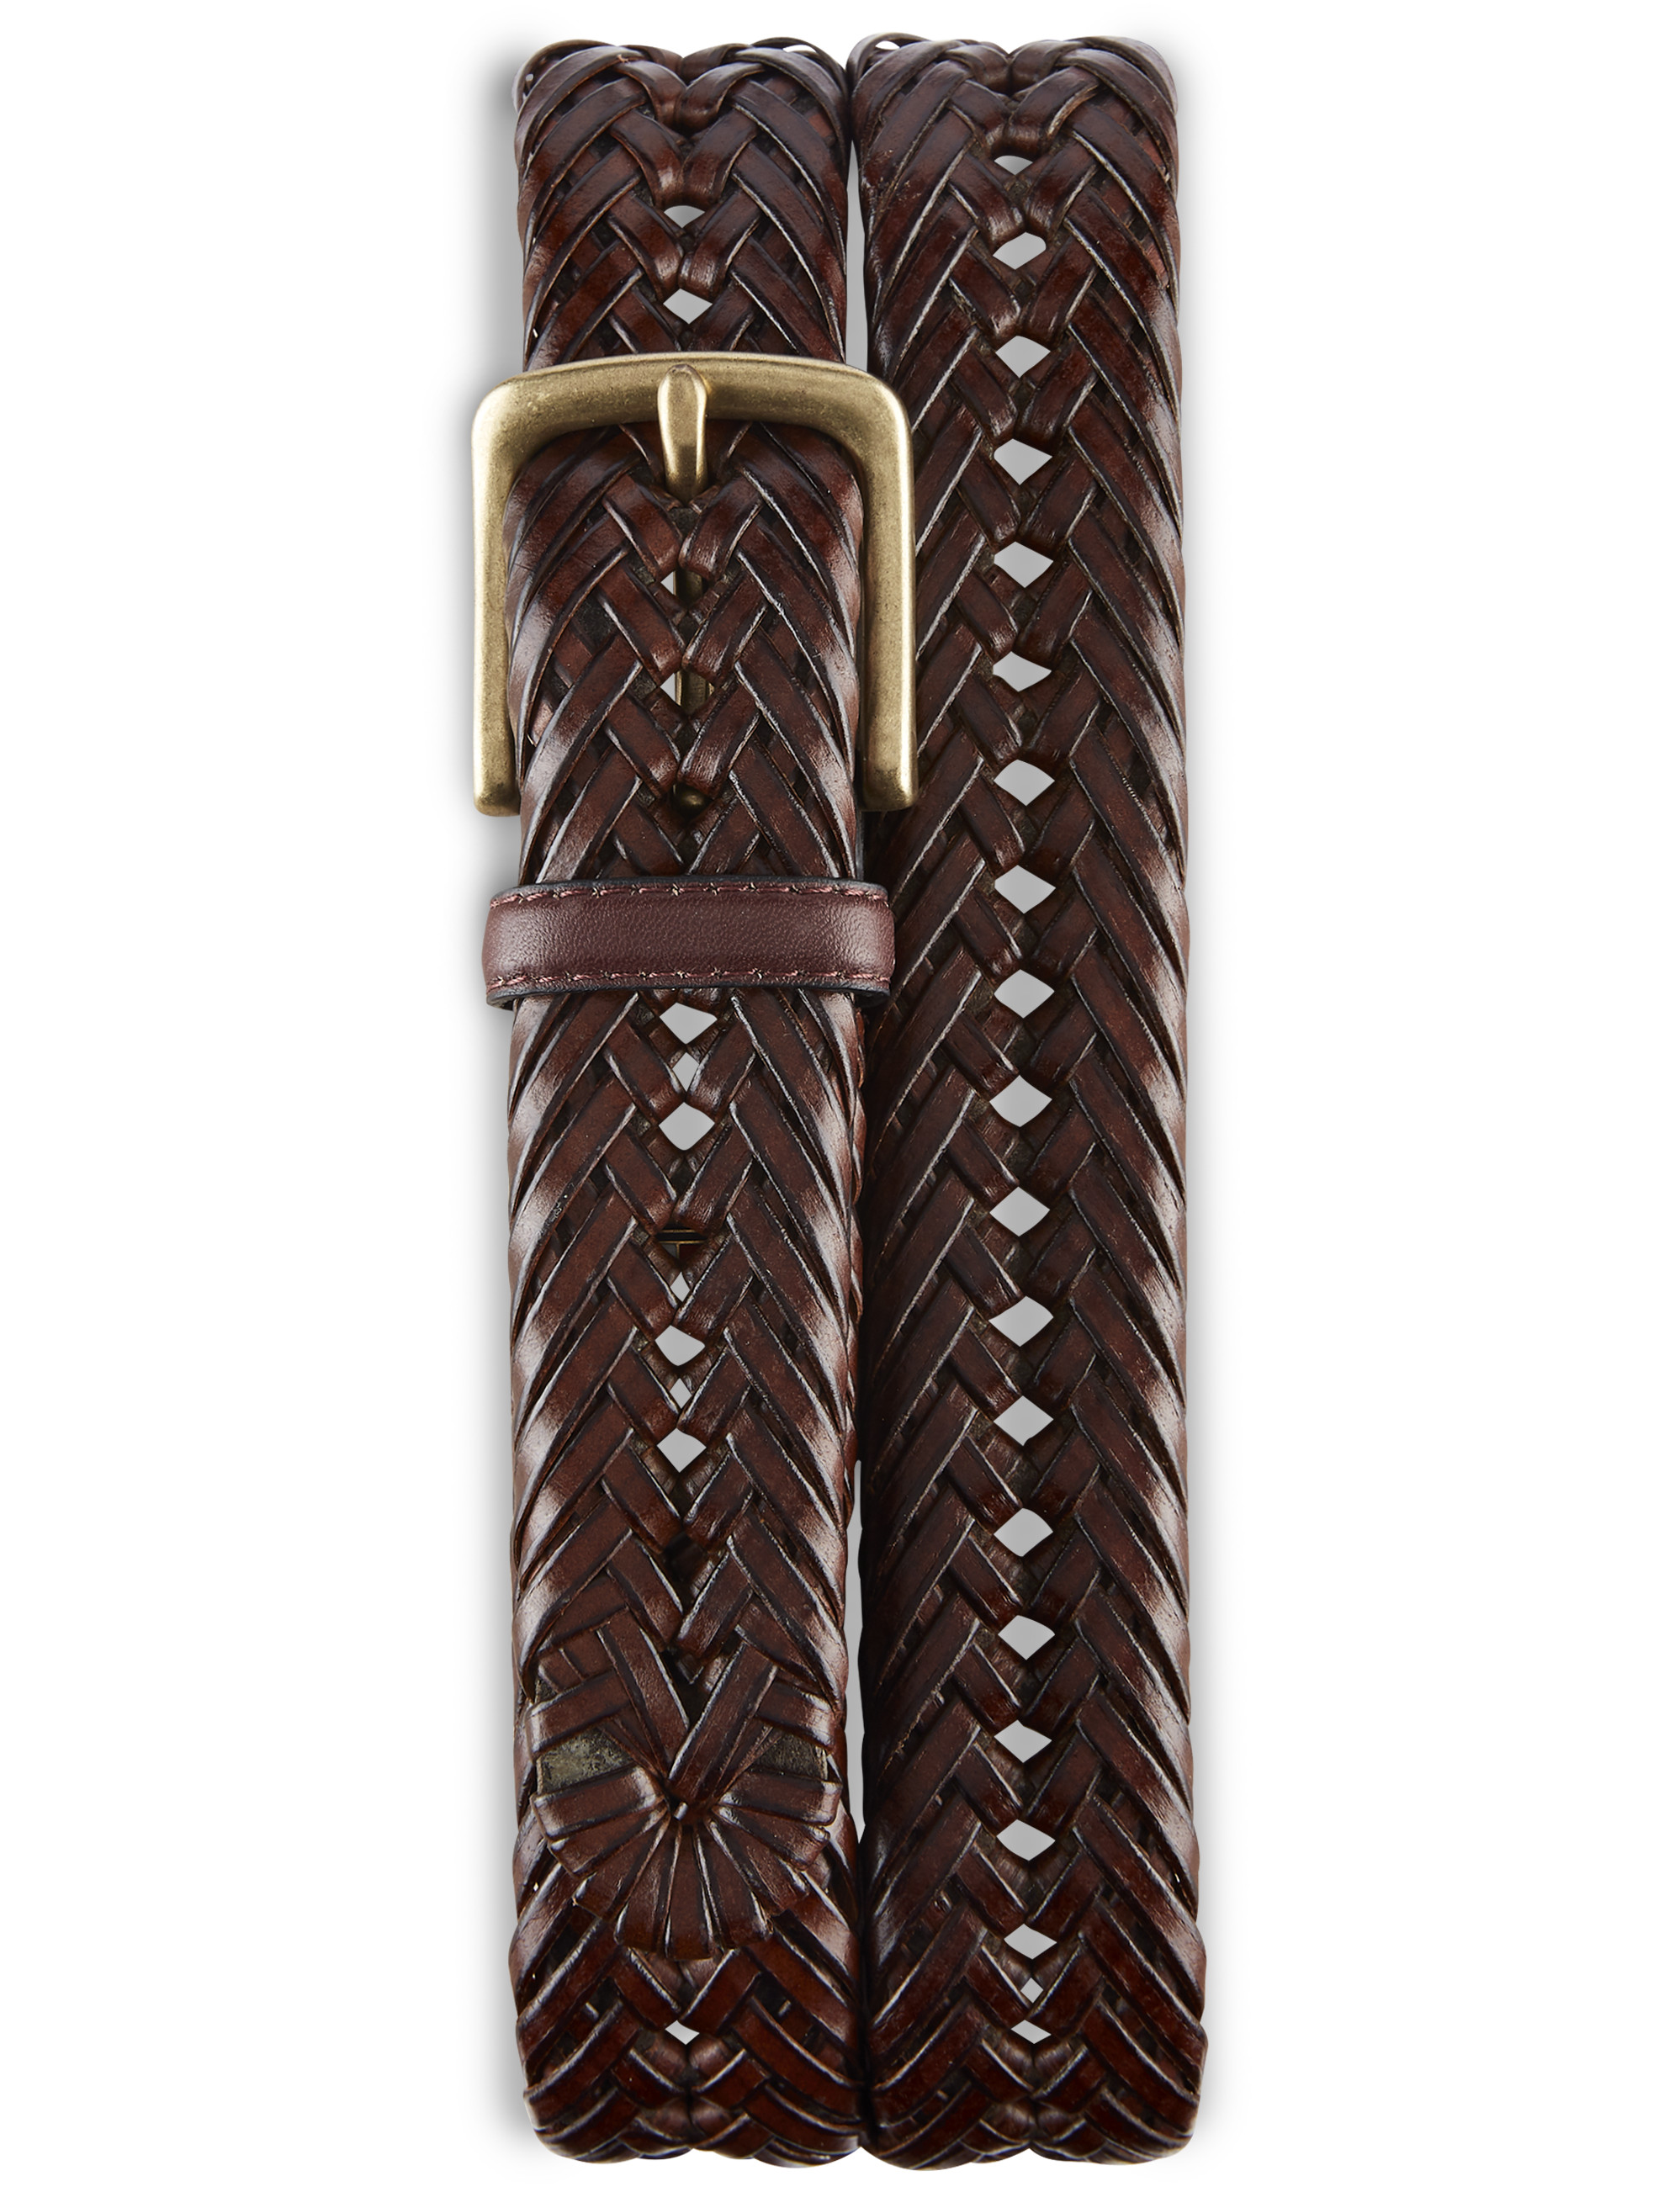 Tommy Hilfiger Men's Braided Belt, Tan, 40 - Imported Products